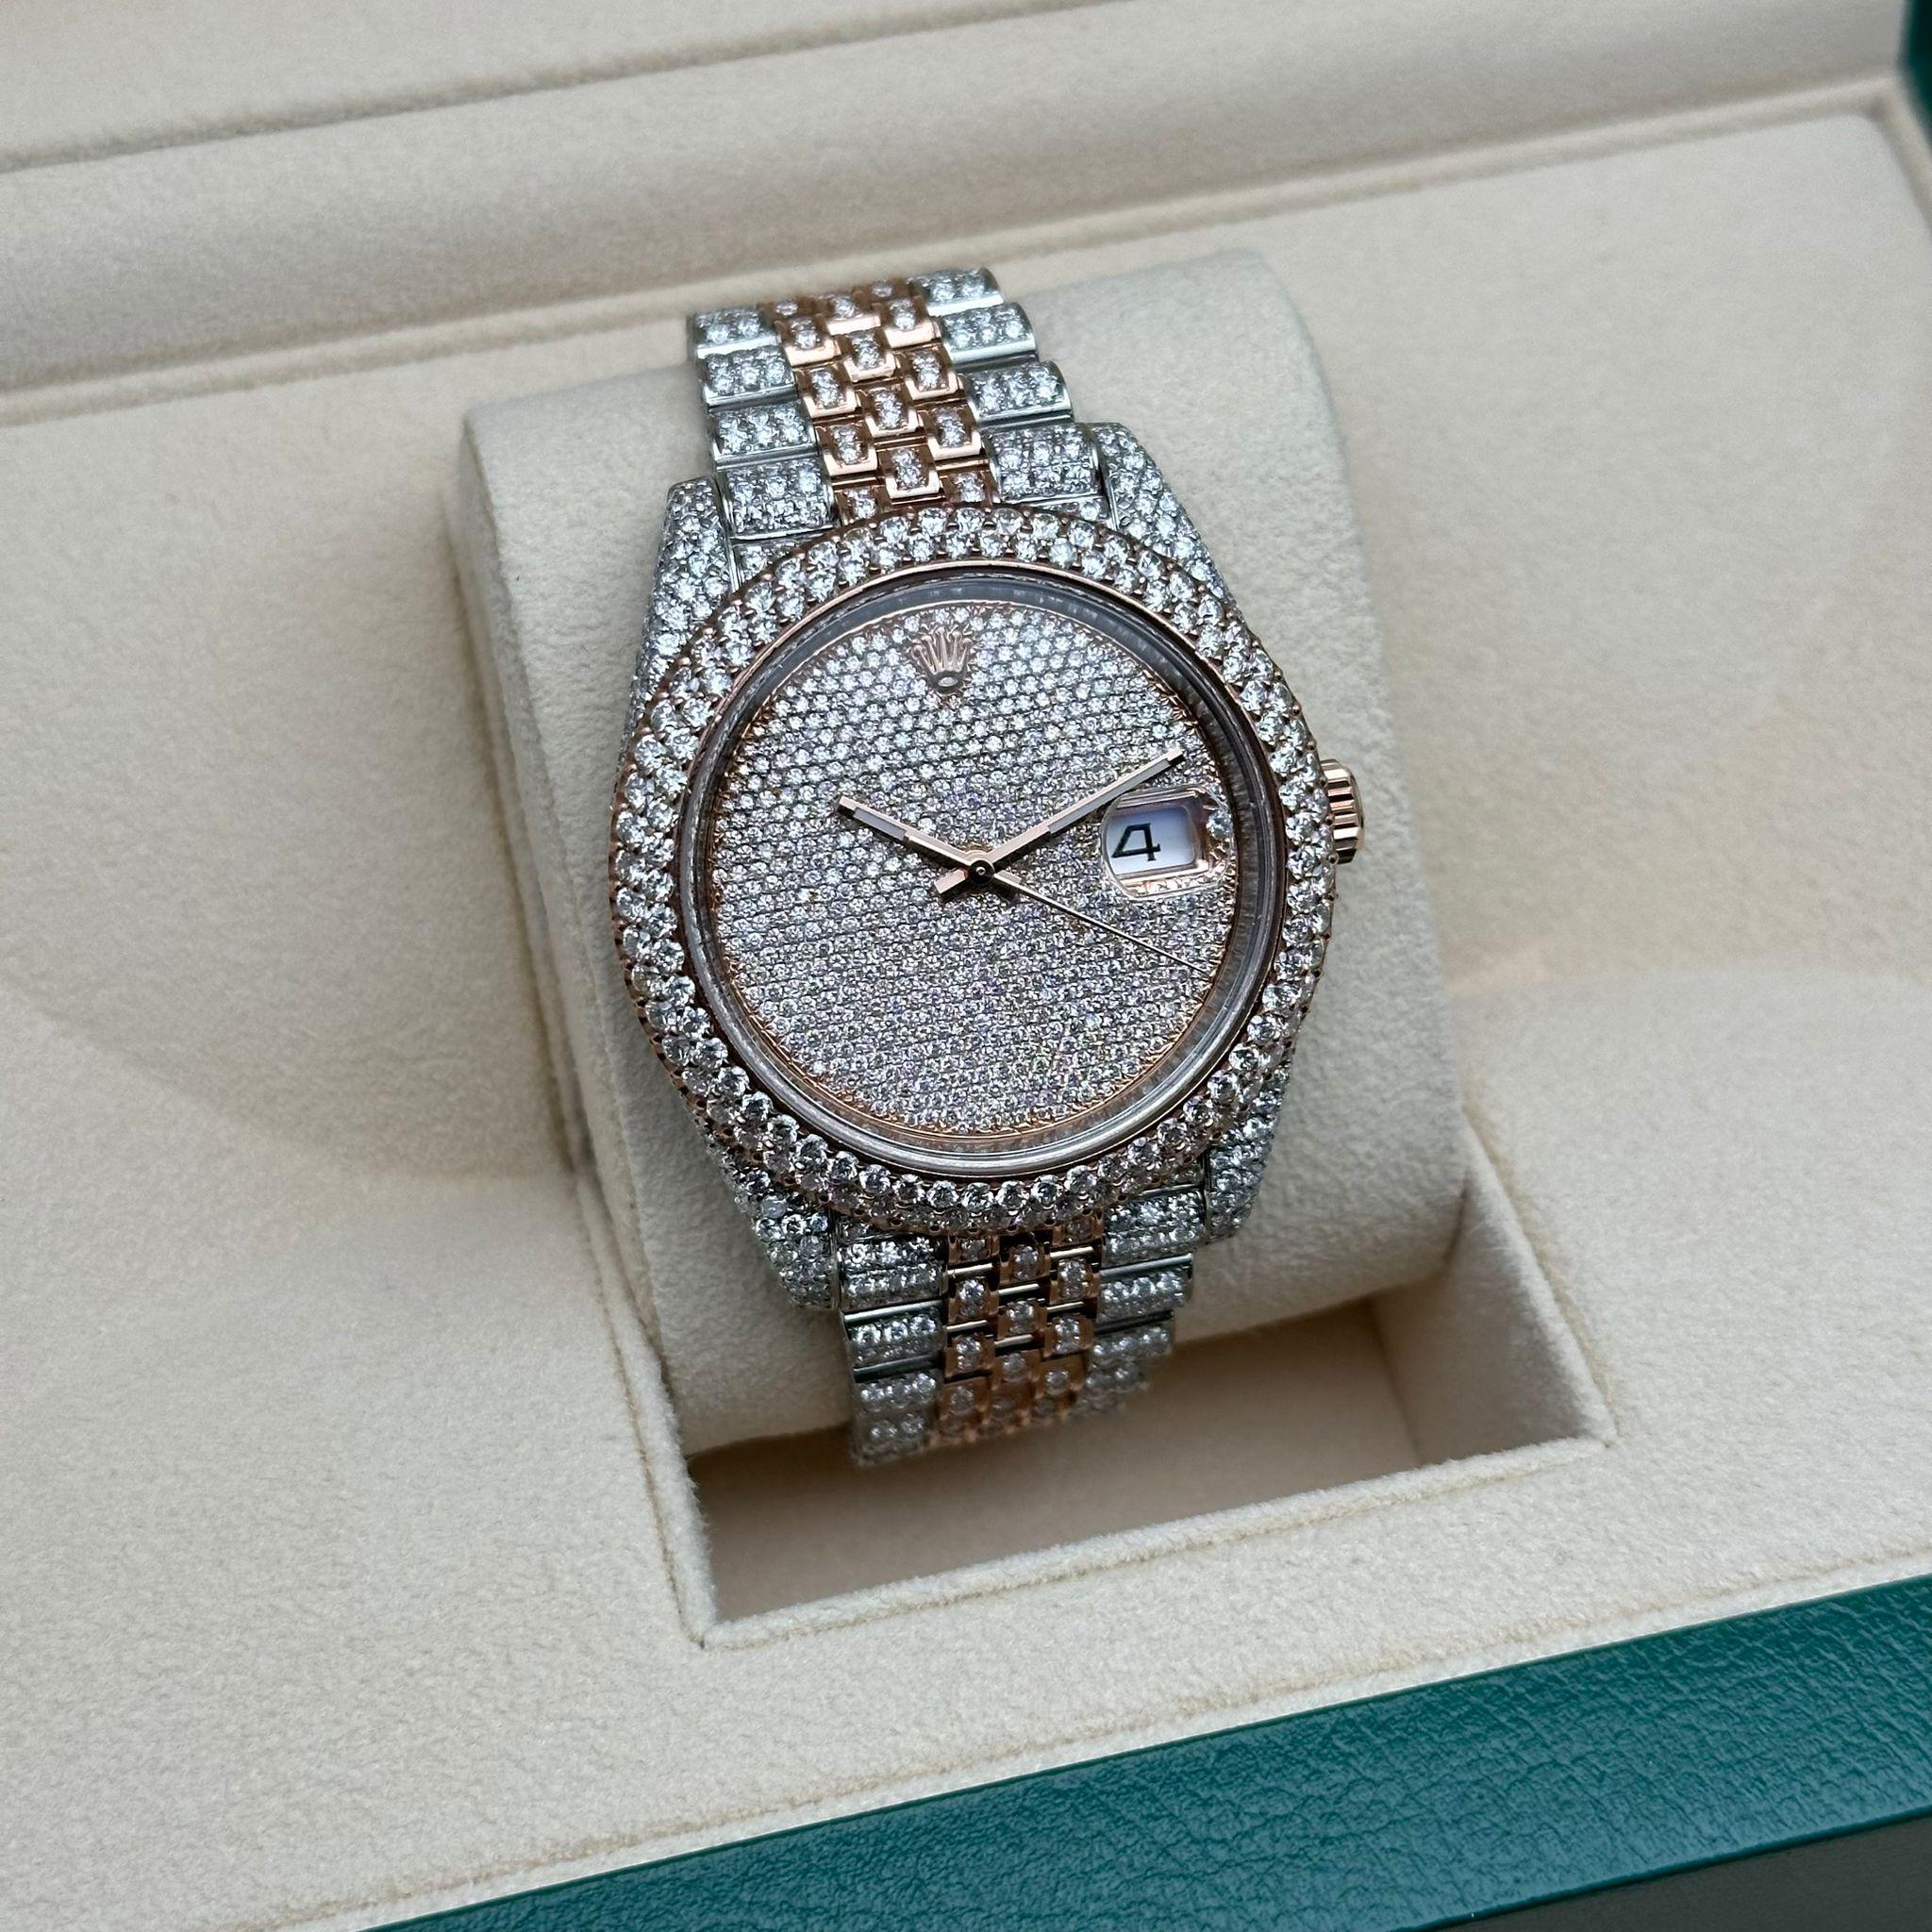 Display model. 2021 card. Total diamond 18.47 ct. Color: G-H, Clarity: VS-SI. Comes with the original box and papers.

Brand and Model
Brand: Rolex
Model: Datejust 126301

General Information
Department: Men
Year Manufactured: